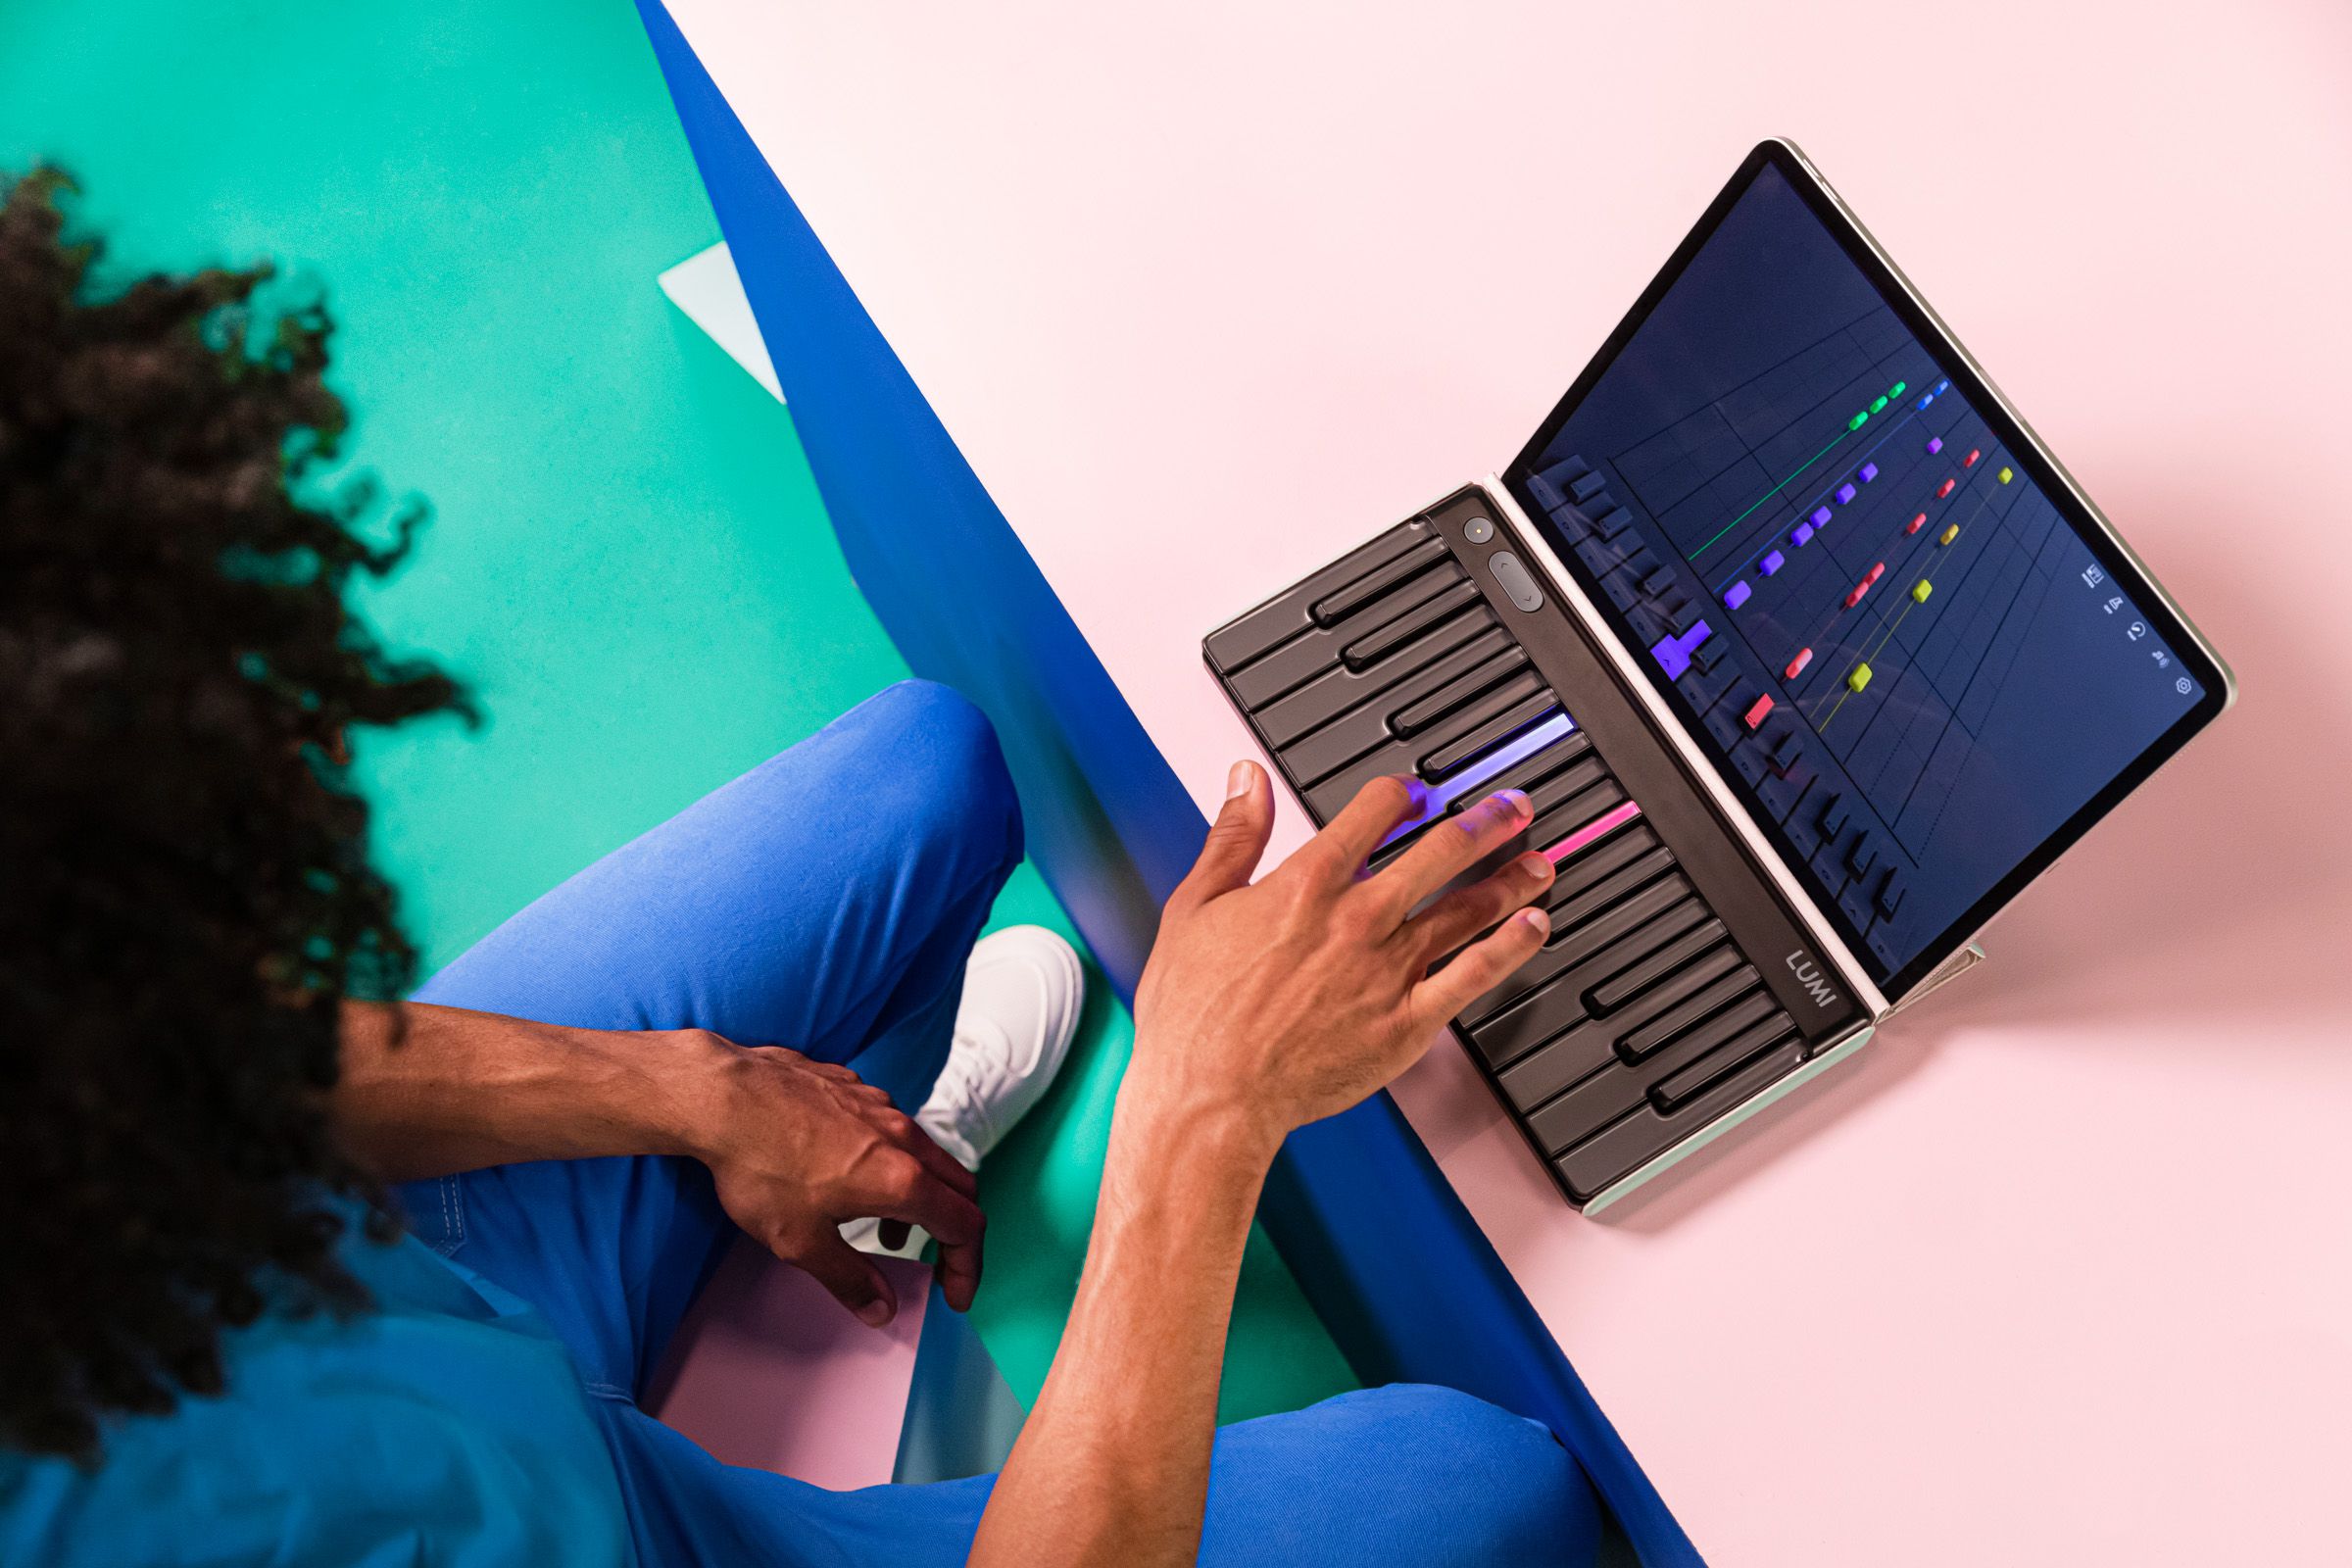 The light-up keys on the $299 Lumi keyboard help guide beginner pianists. A $79 annual subscription buys access to more songs and lessons. 